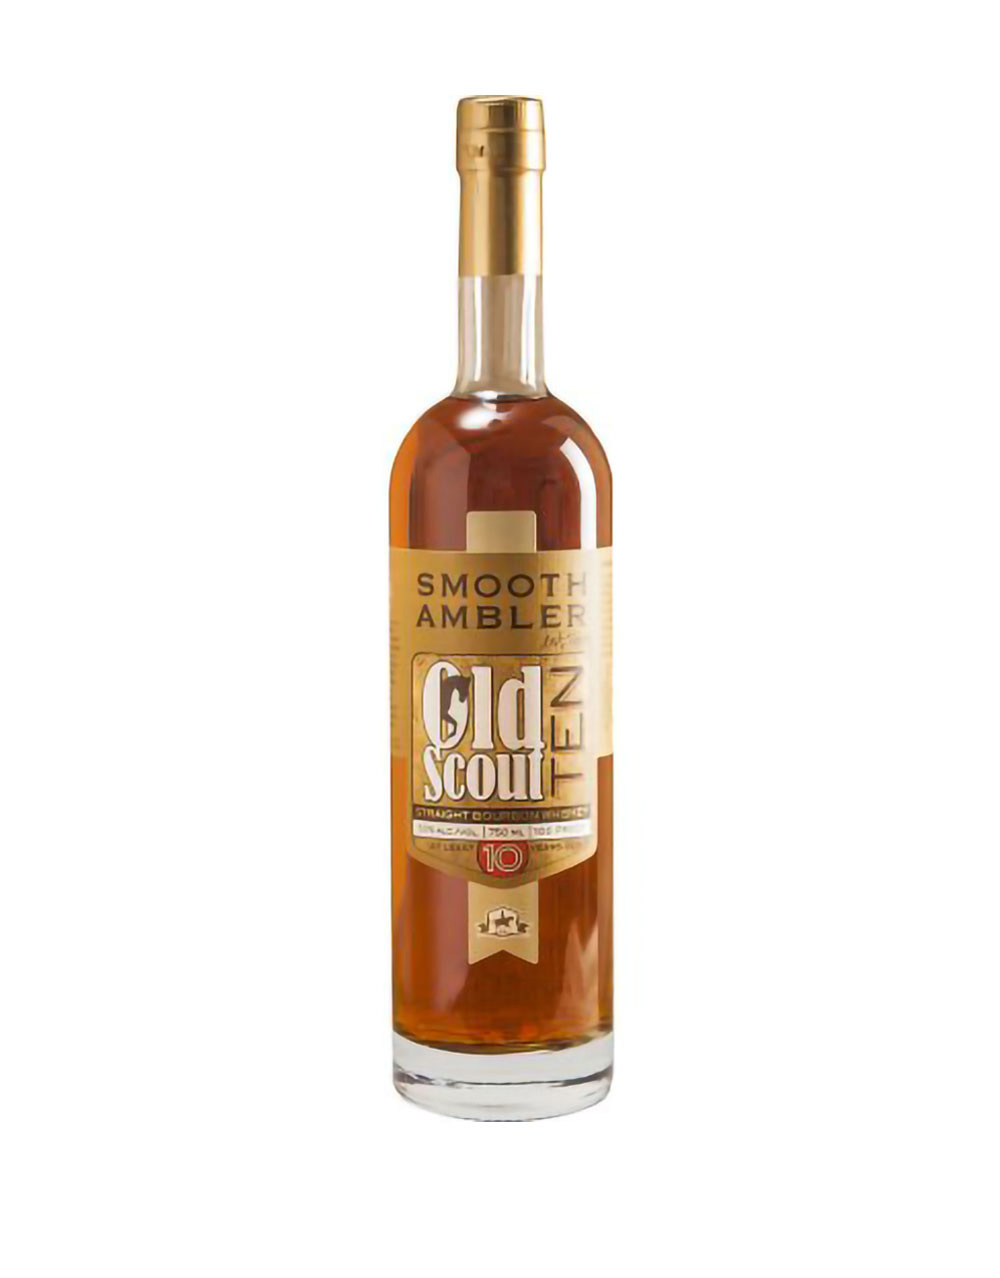 Smooth Ambler Old Scout Ten 10 Year Old Straight Bourbon Whiskey